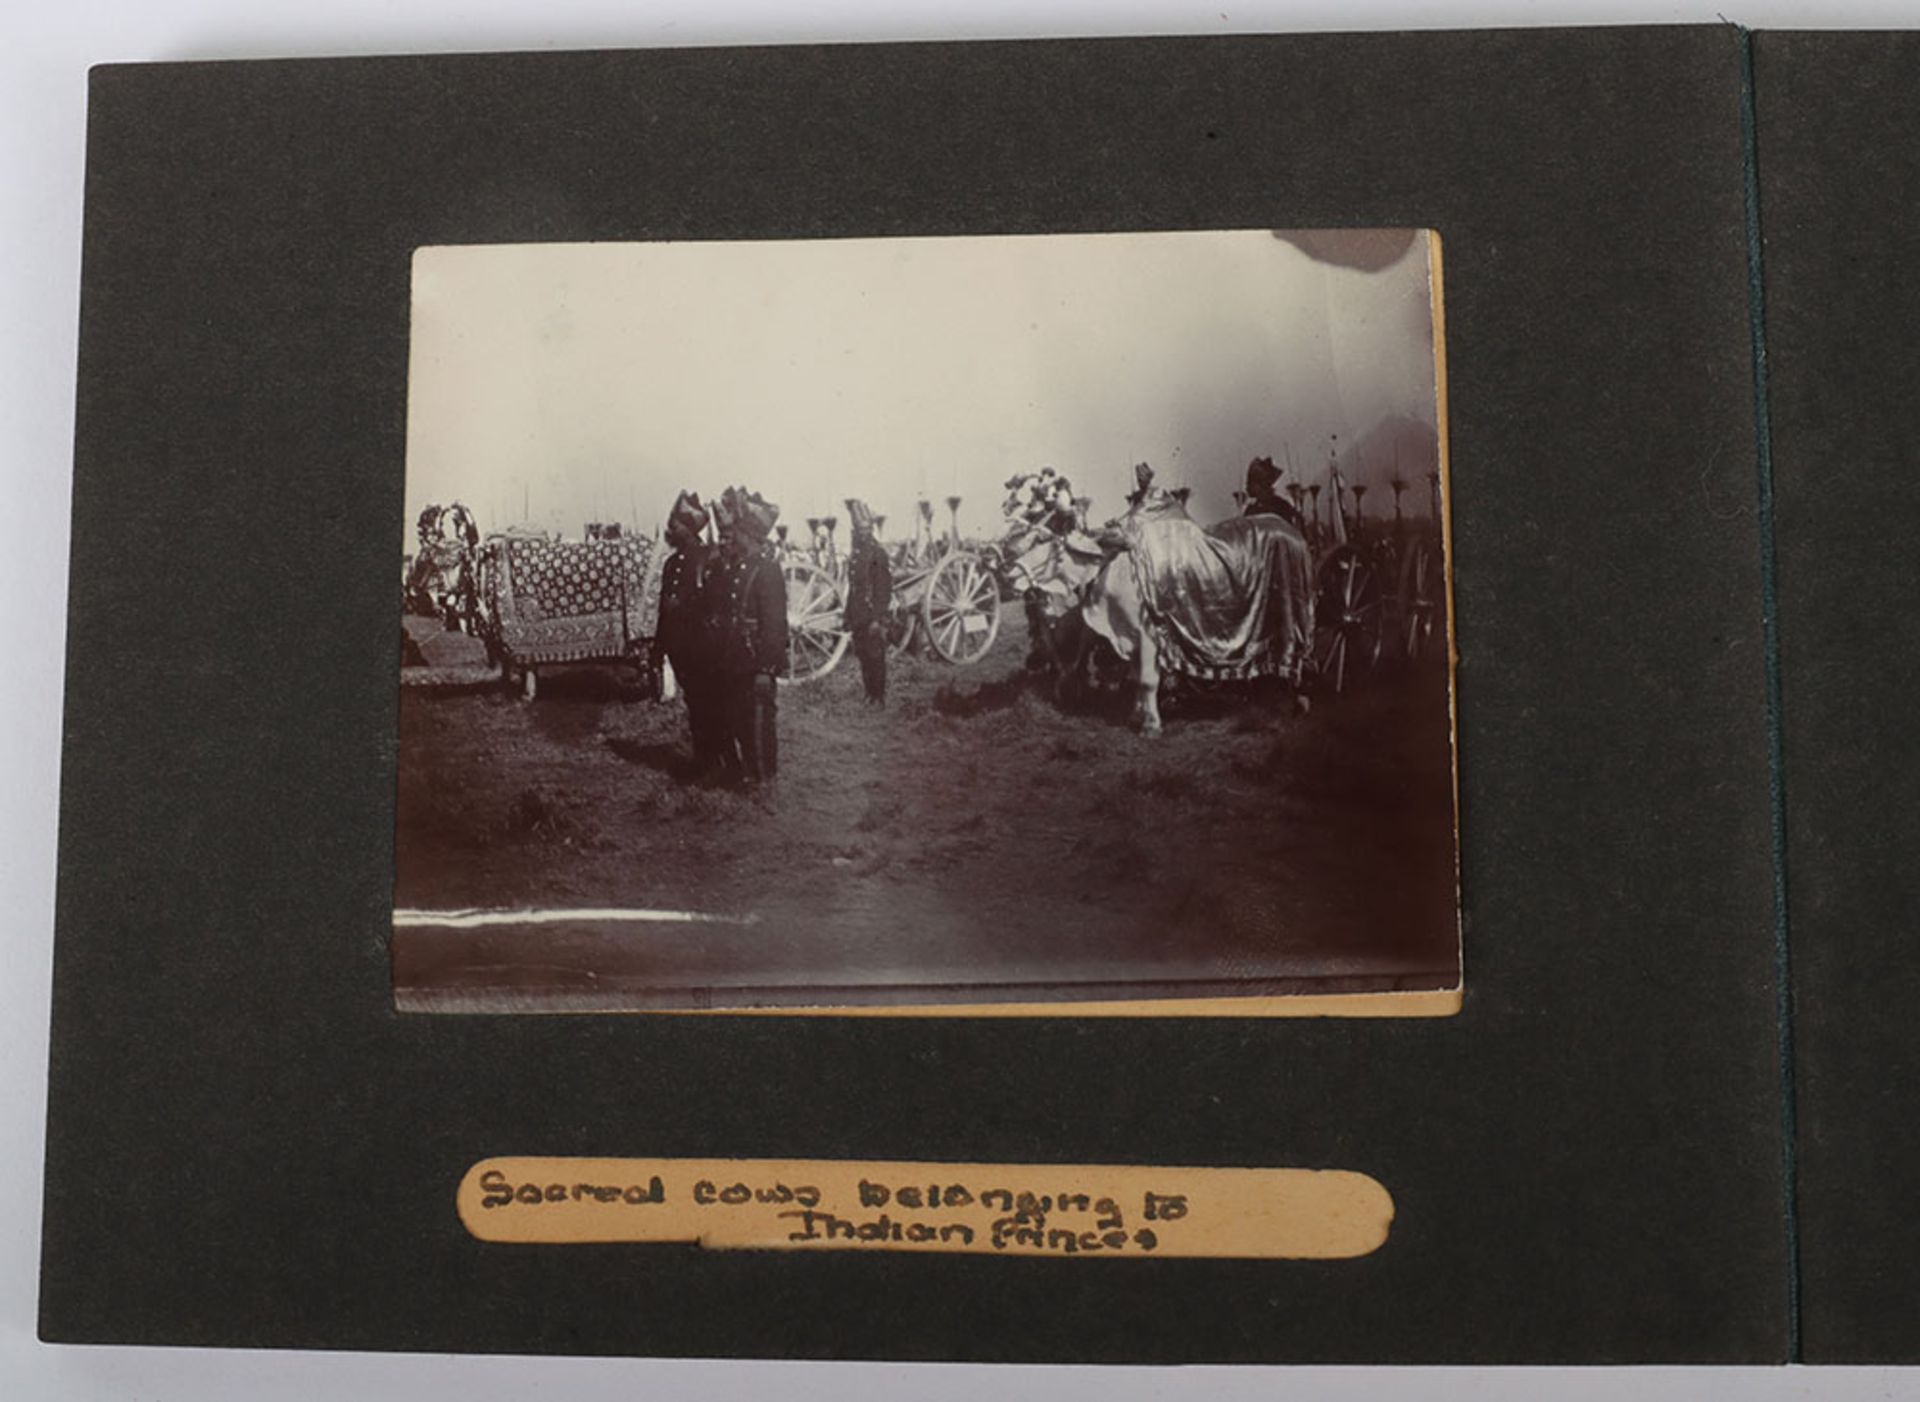 Photograph Album with images of ther Delhi Durbar, troops lining streets, Elephants, sacred cows bel - Image 43 of 48